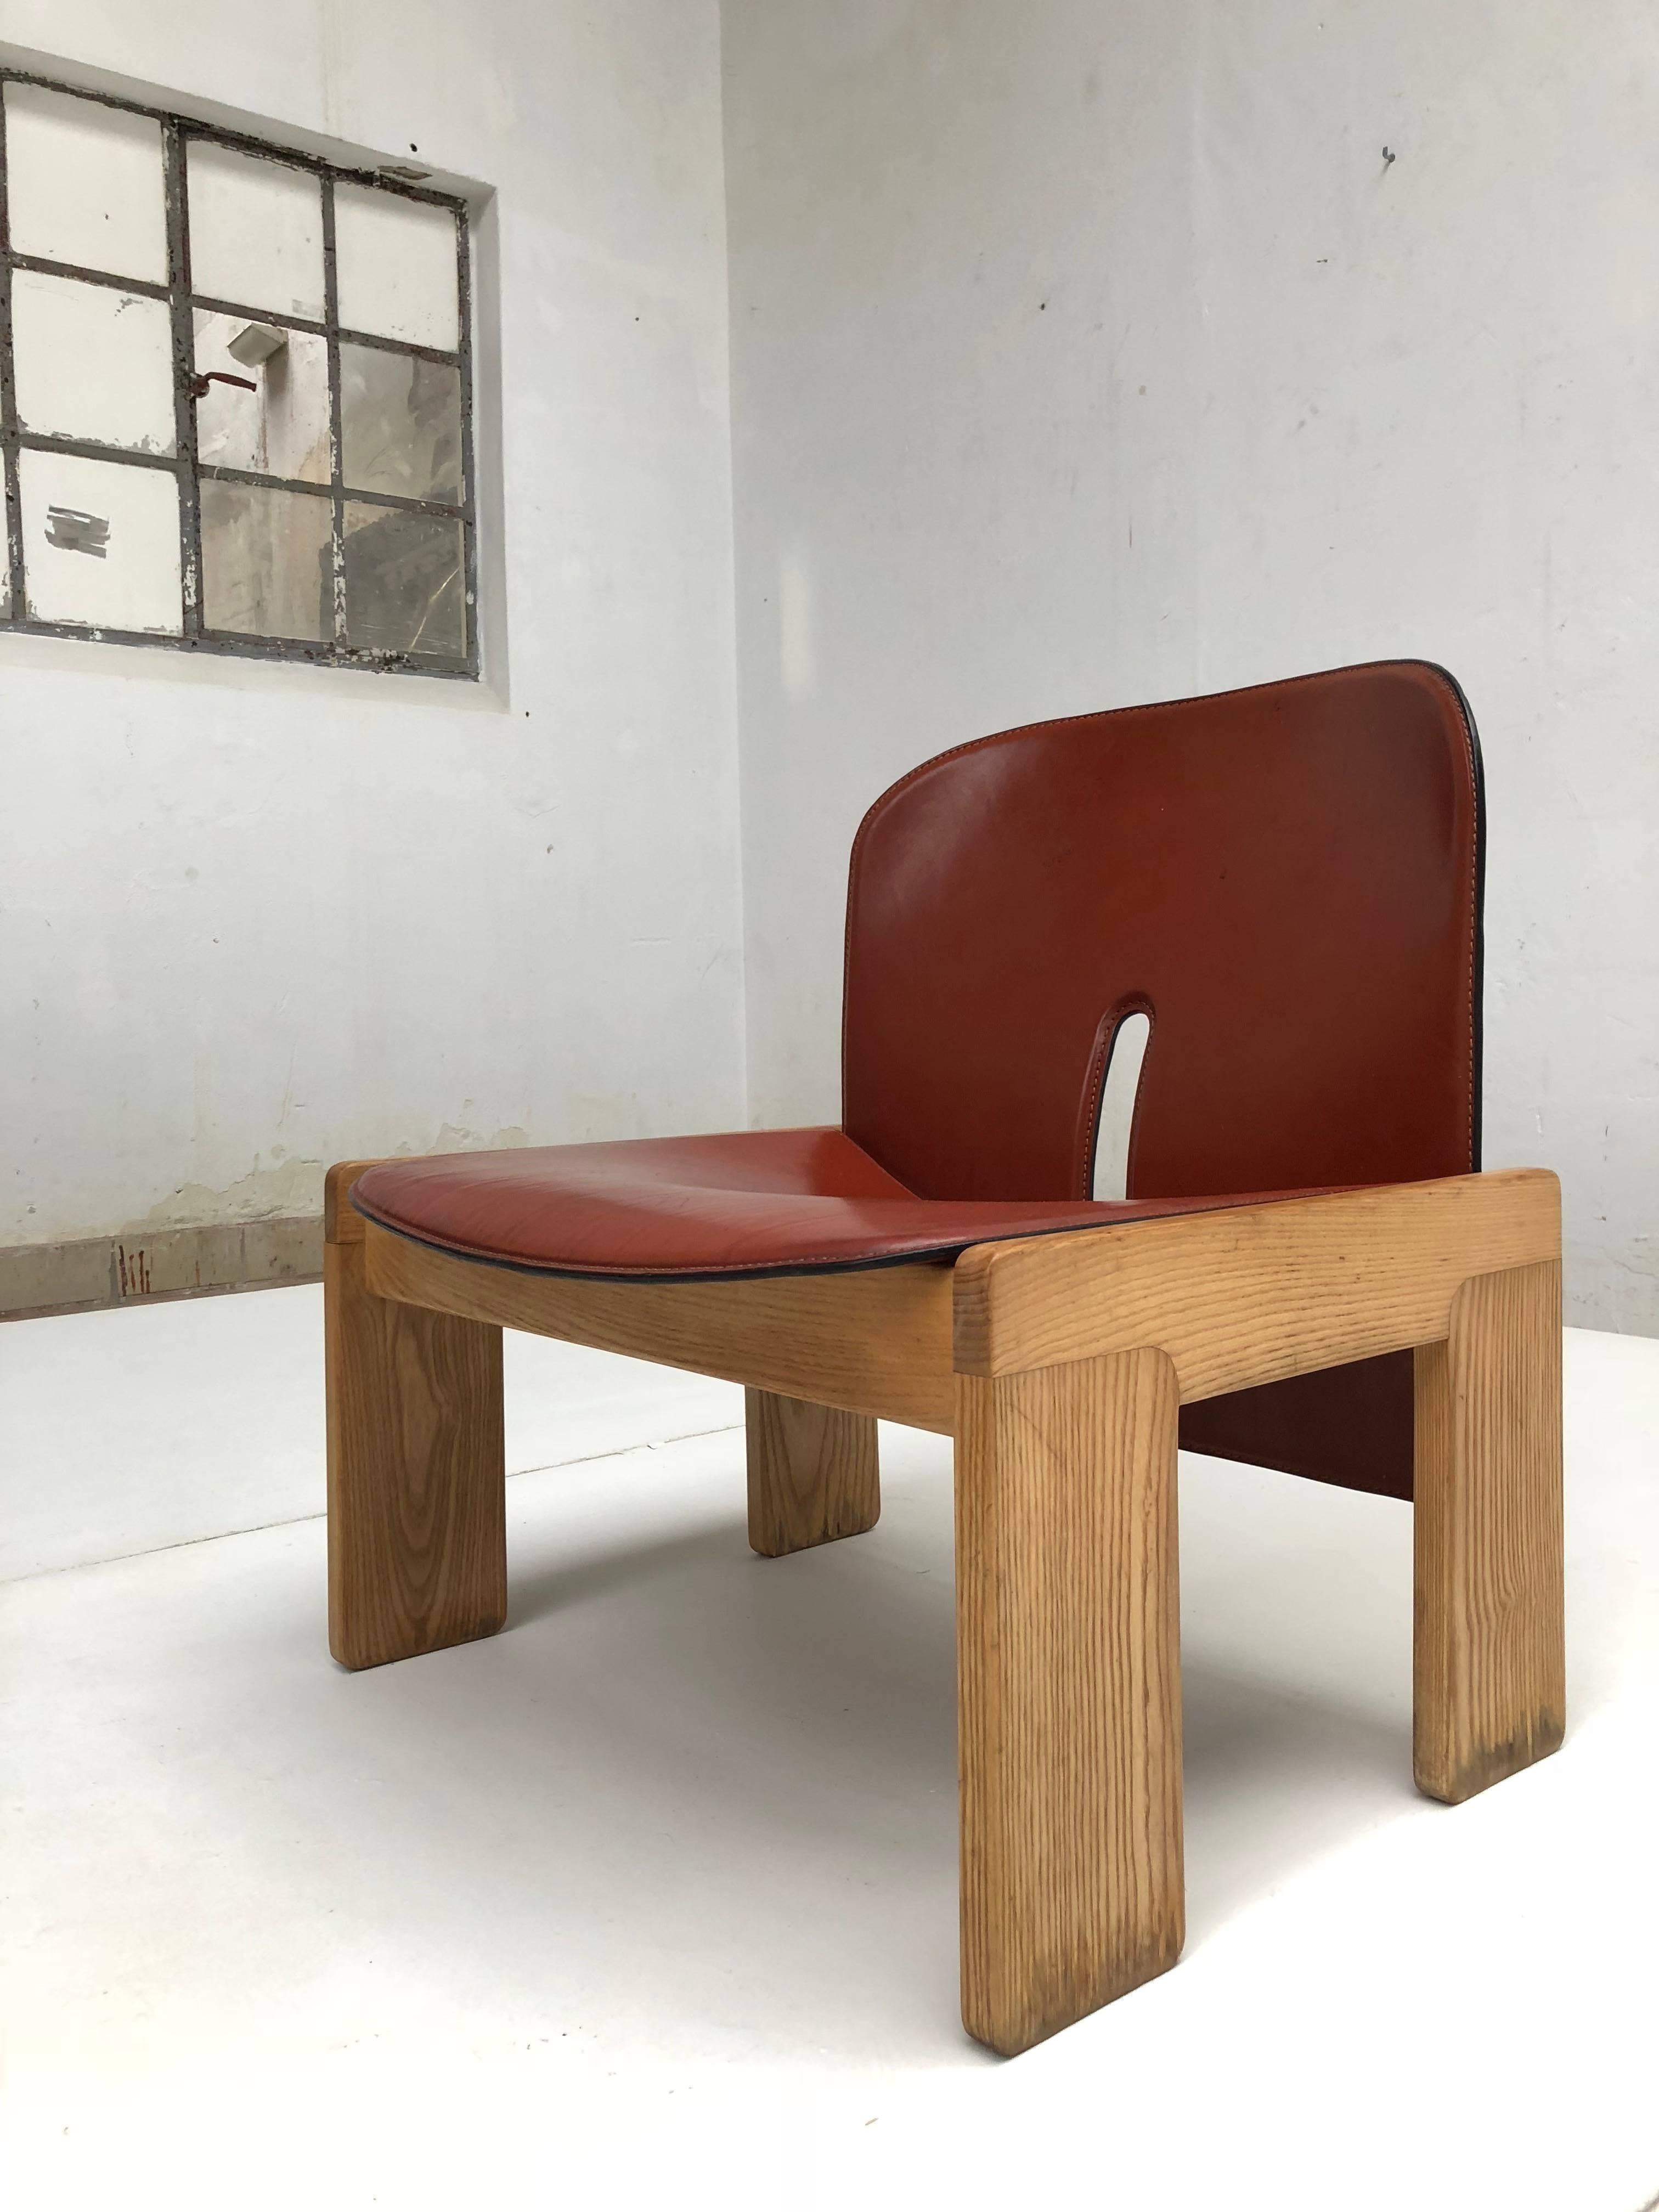 Original vintage leather and ash wood 925 chair by Afra and Tobia Scarpa for Cassina, 1966

Solid ash wood frame with original leather over plywood seat and back

The leather has a superb original patina and gives this chair a strong vintage